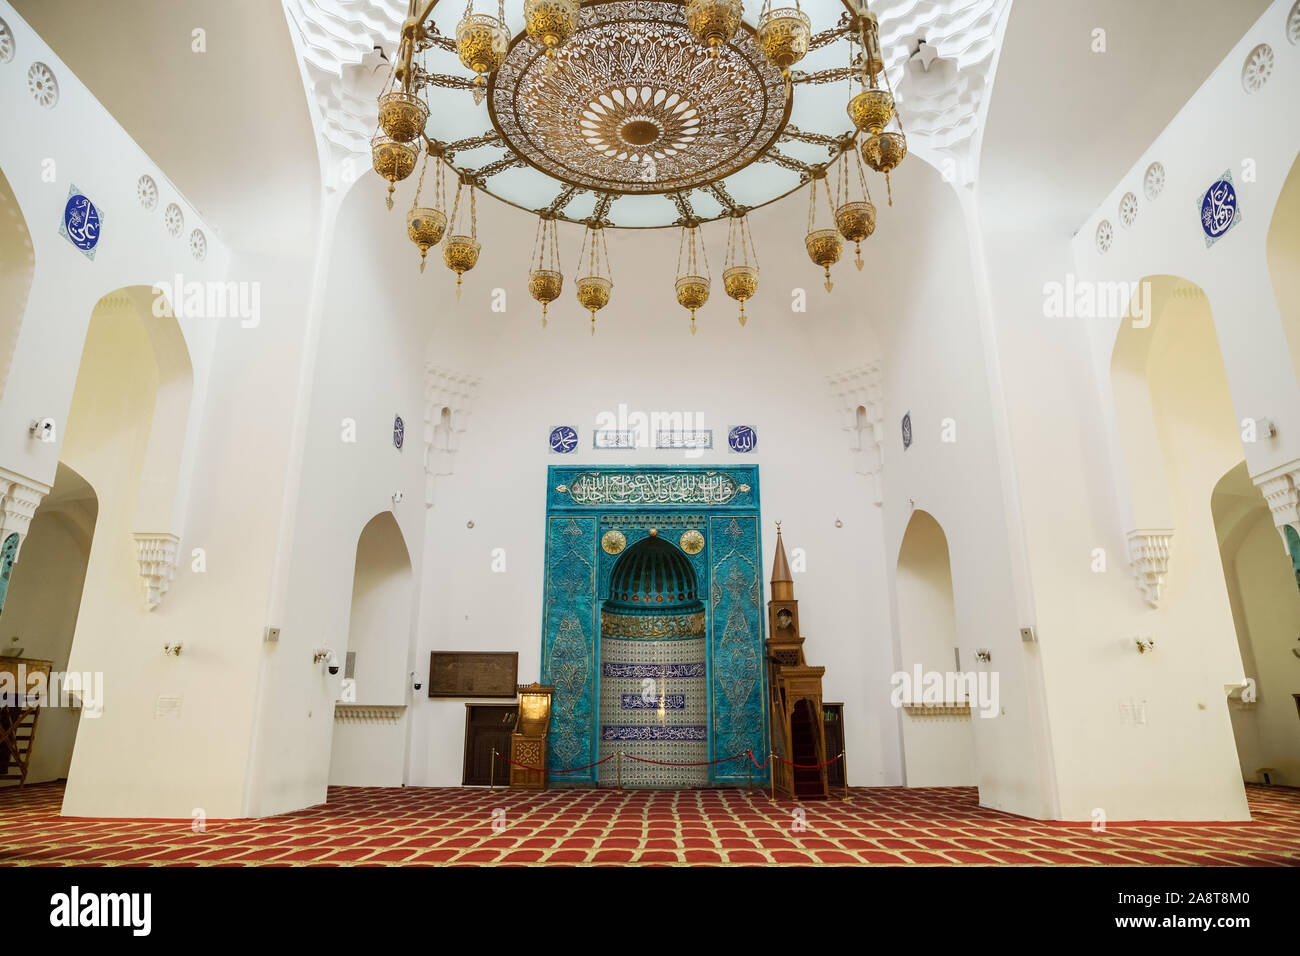 ST. PETERSBURG, RUSSIA - OCTOBER 26, 2019: interior of the main cathedral mosque in St. Petersburg Stock Photo